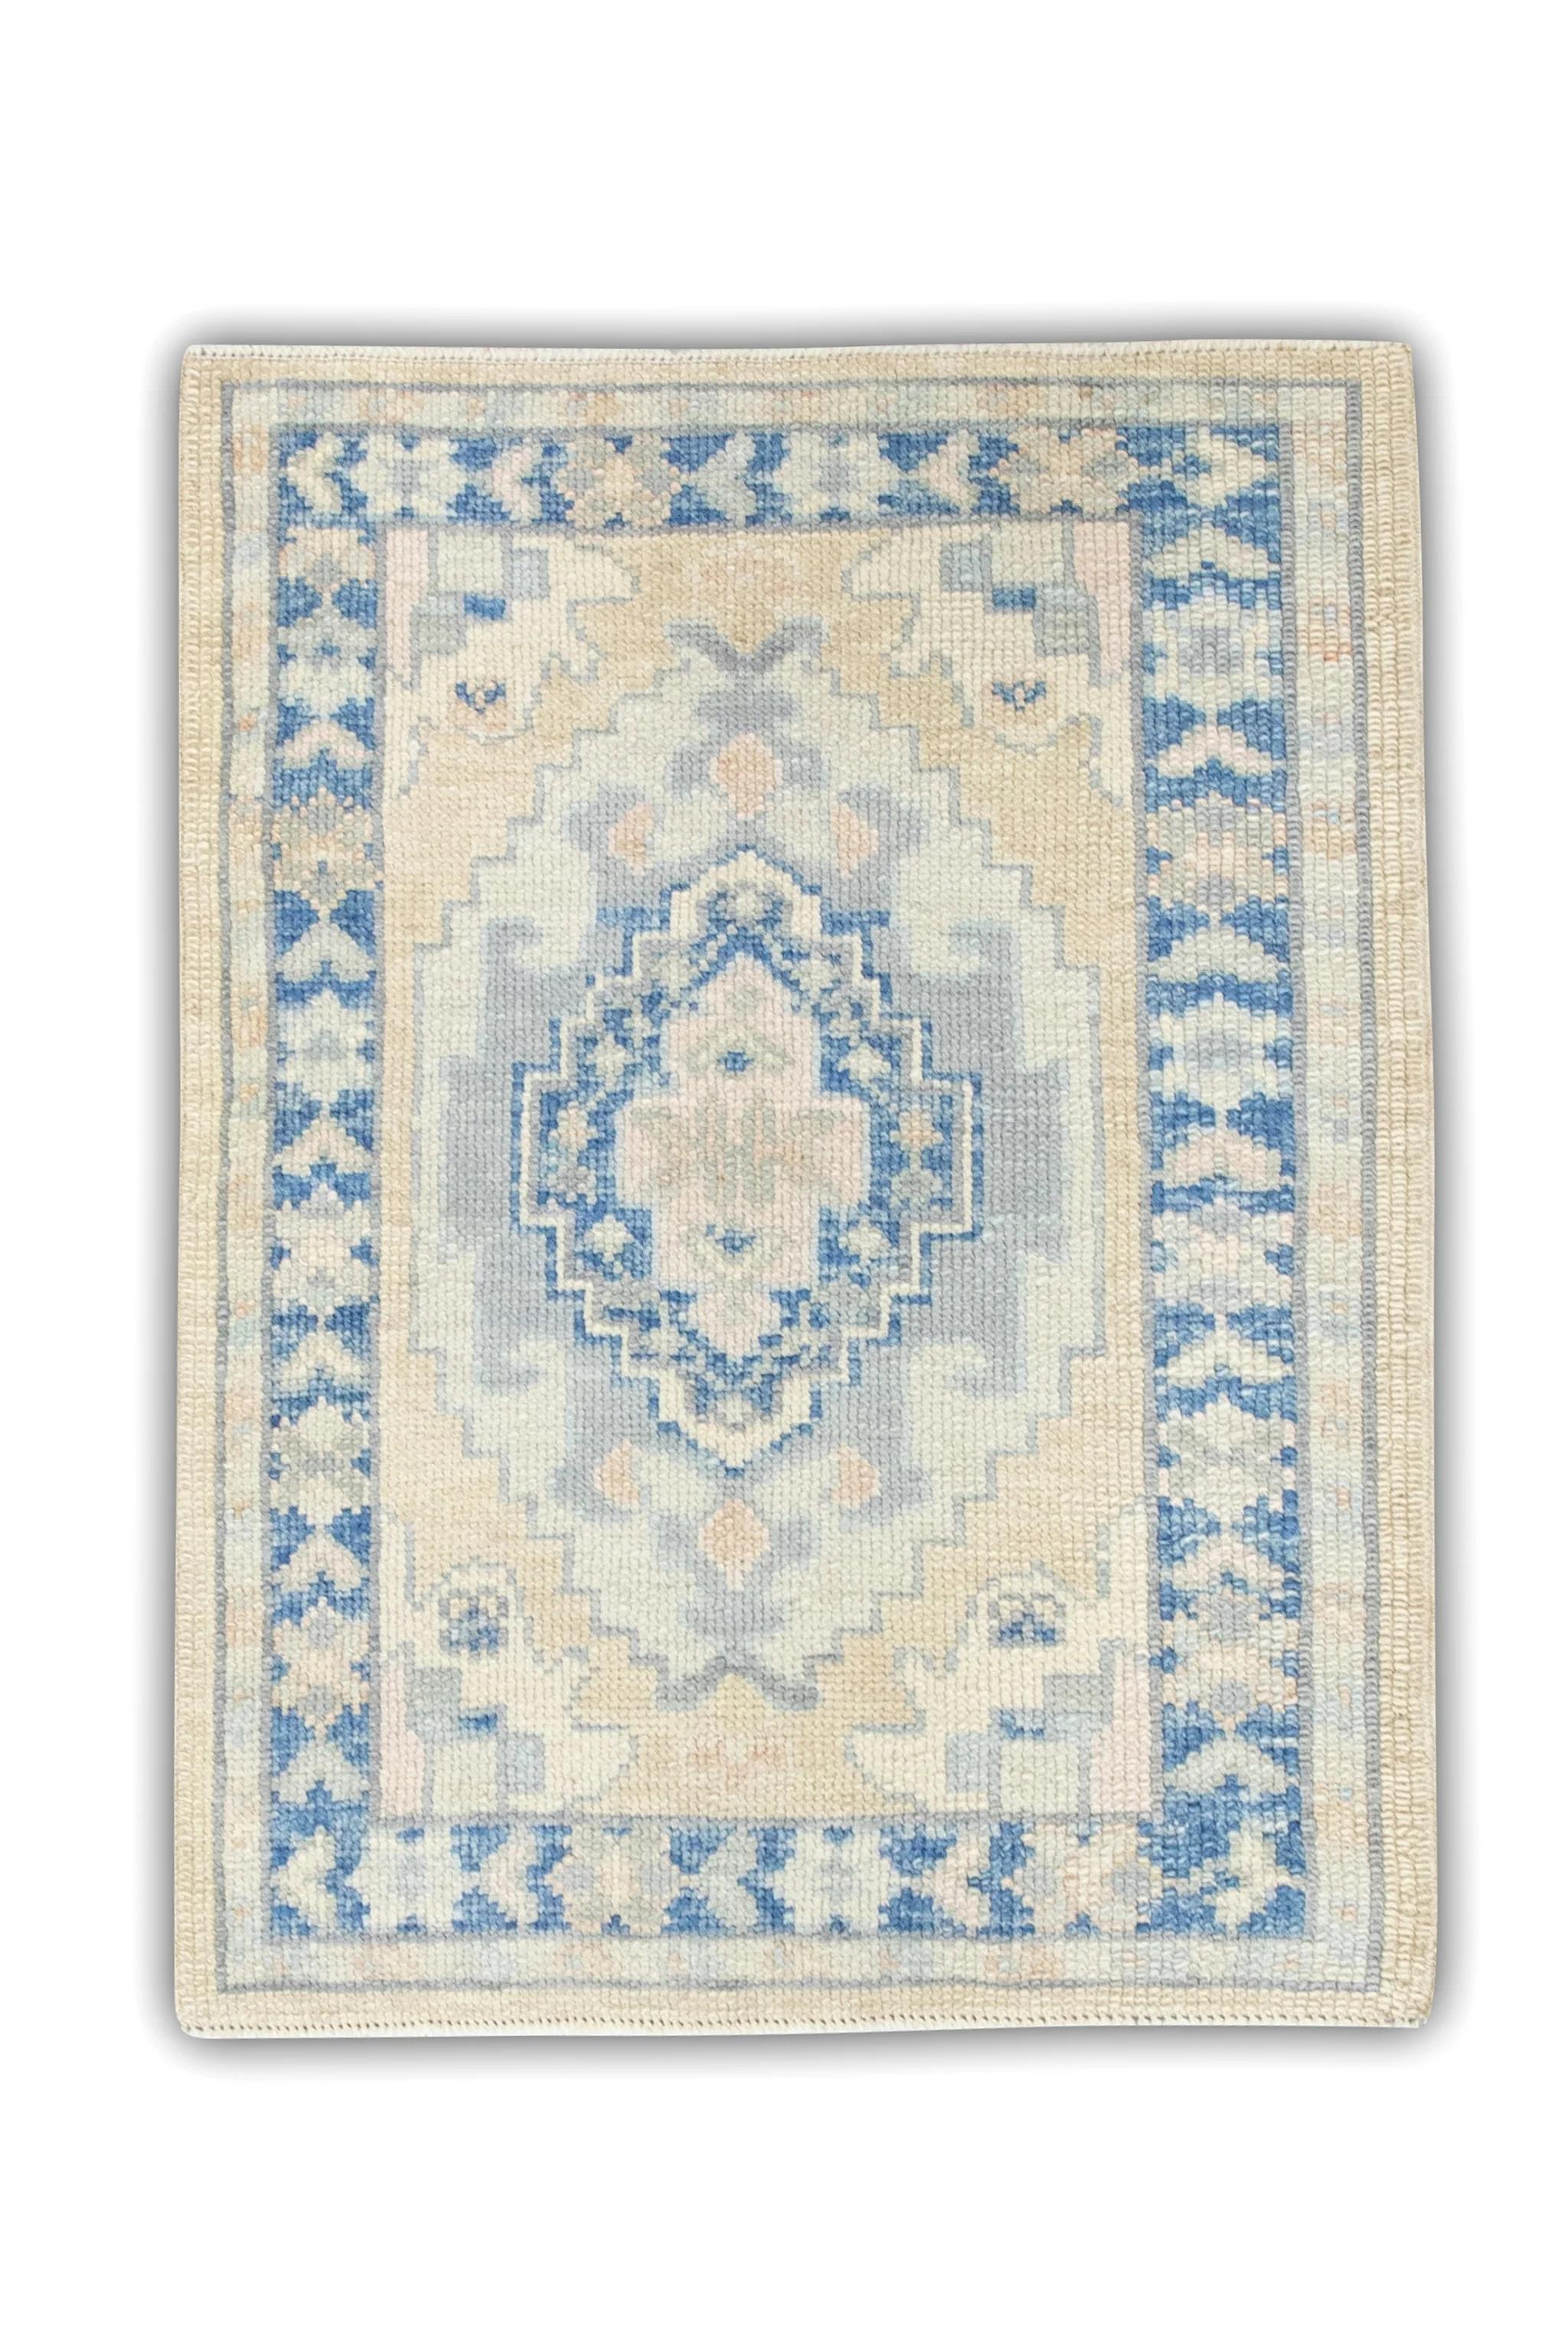 Contemporary Blue and Yellow Geometric Design Handwoven Wool Turkish Oushak Rug 2'3